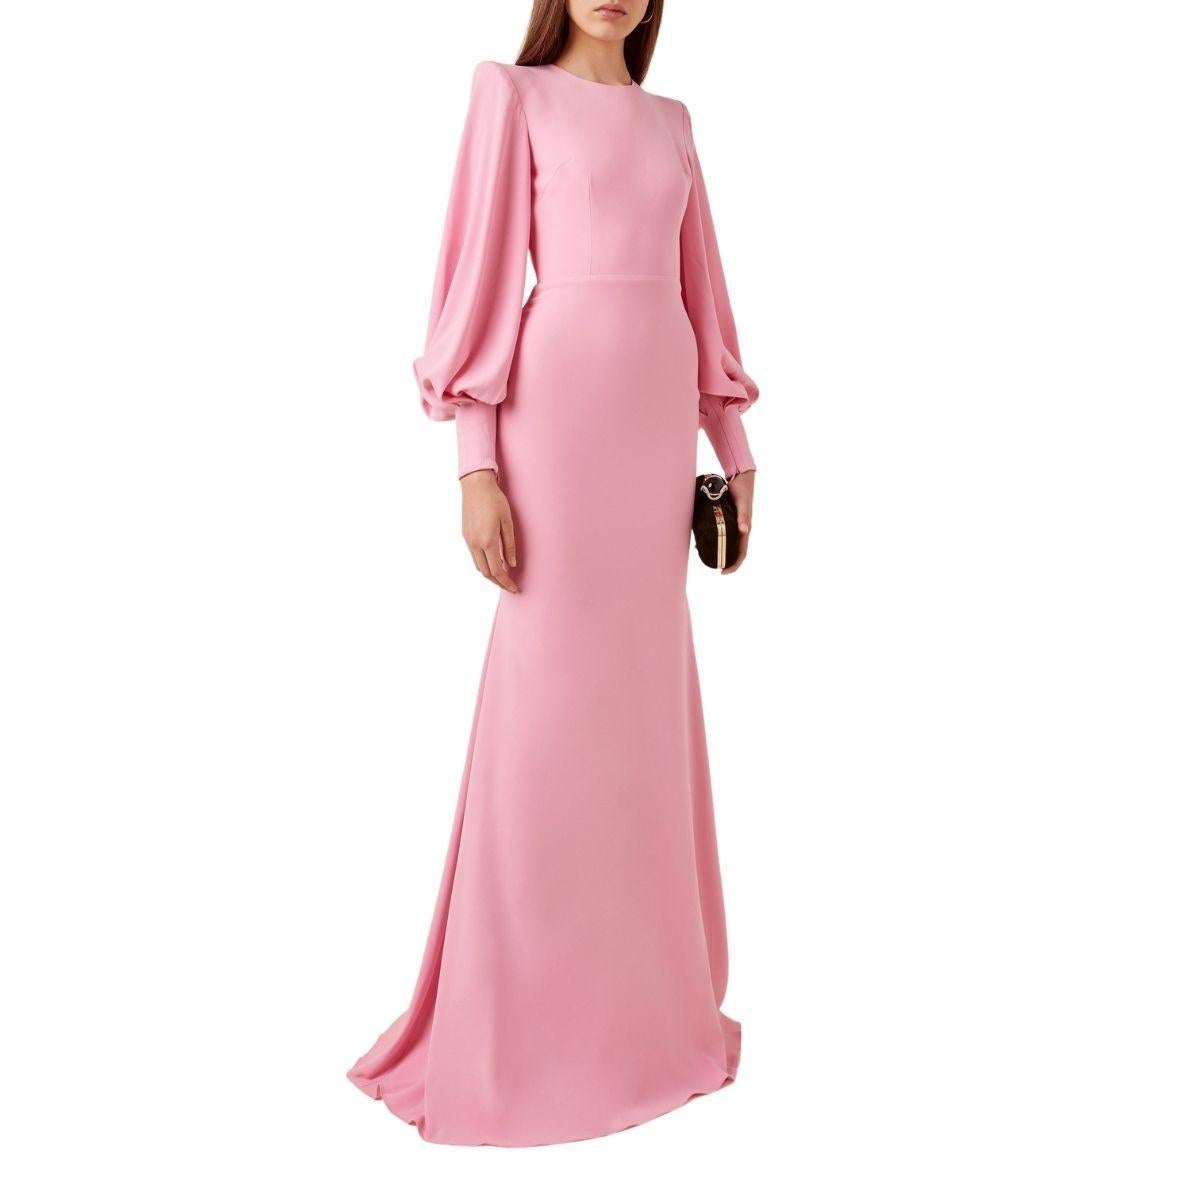 The 'David' gown has an extra sleeve and an elongated hem. This style is fitted through the hips in a trumpet silhouette and complete with voluminous bishop sleeves.
Zip fastening at back
Composition: 82% triacetate, 18% polyester
Dry